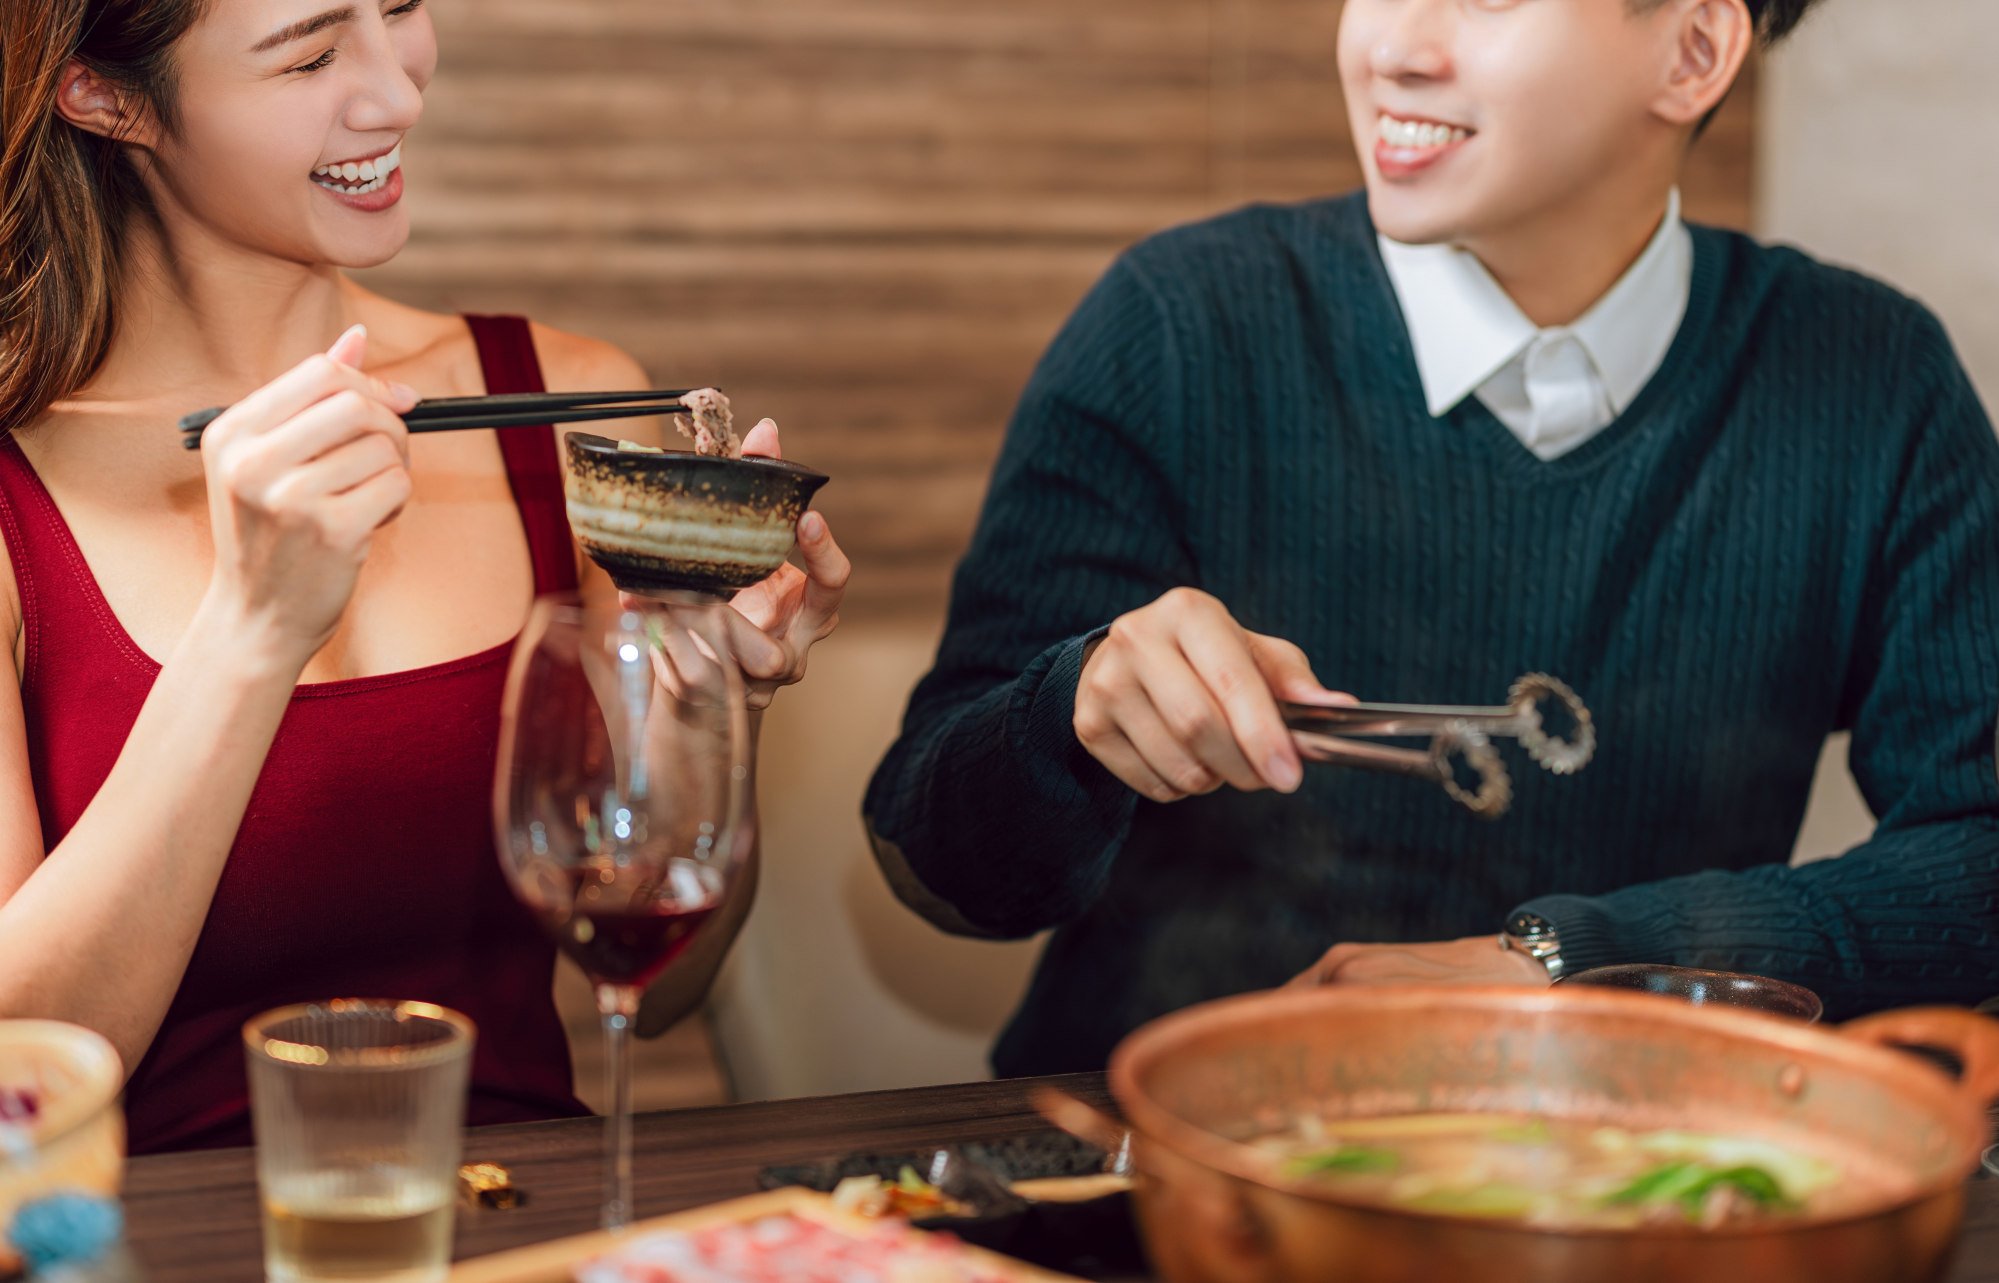 The woman noticed a shift in the man’s demeanor immediately after declining his invitation to go out drinking. Photo: Shutterstock